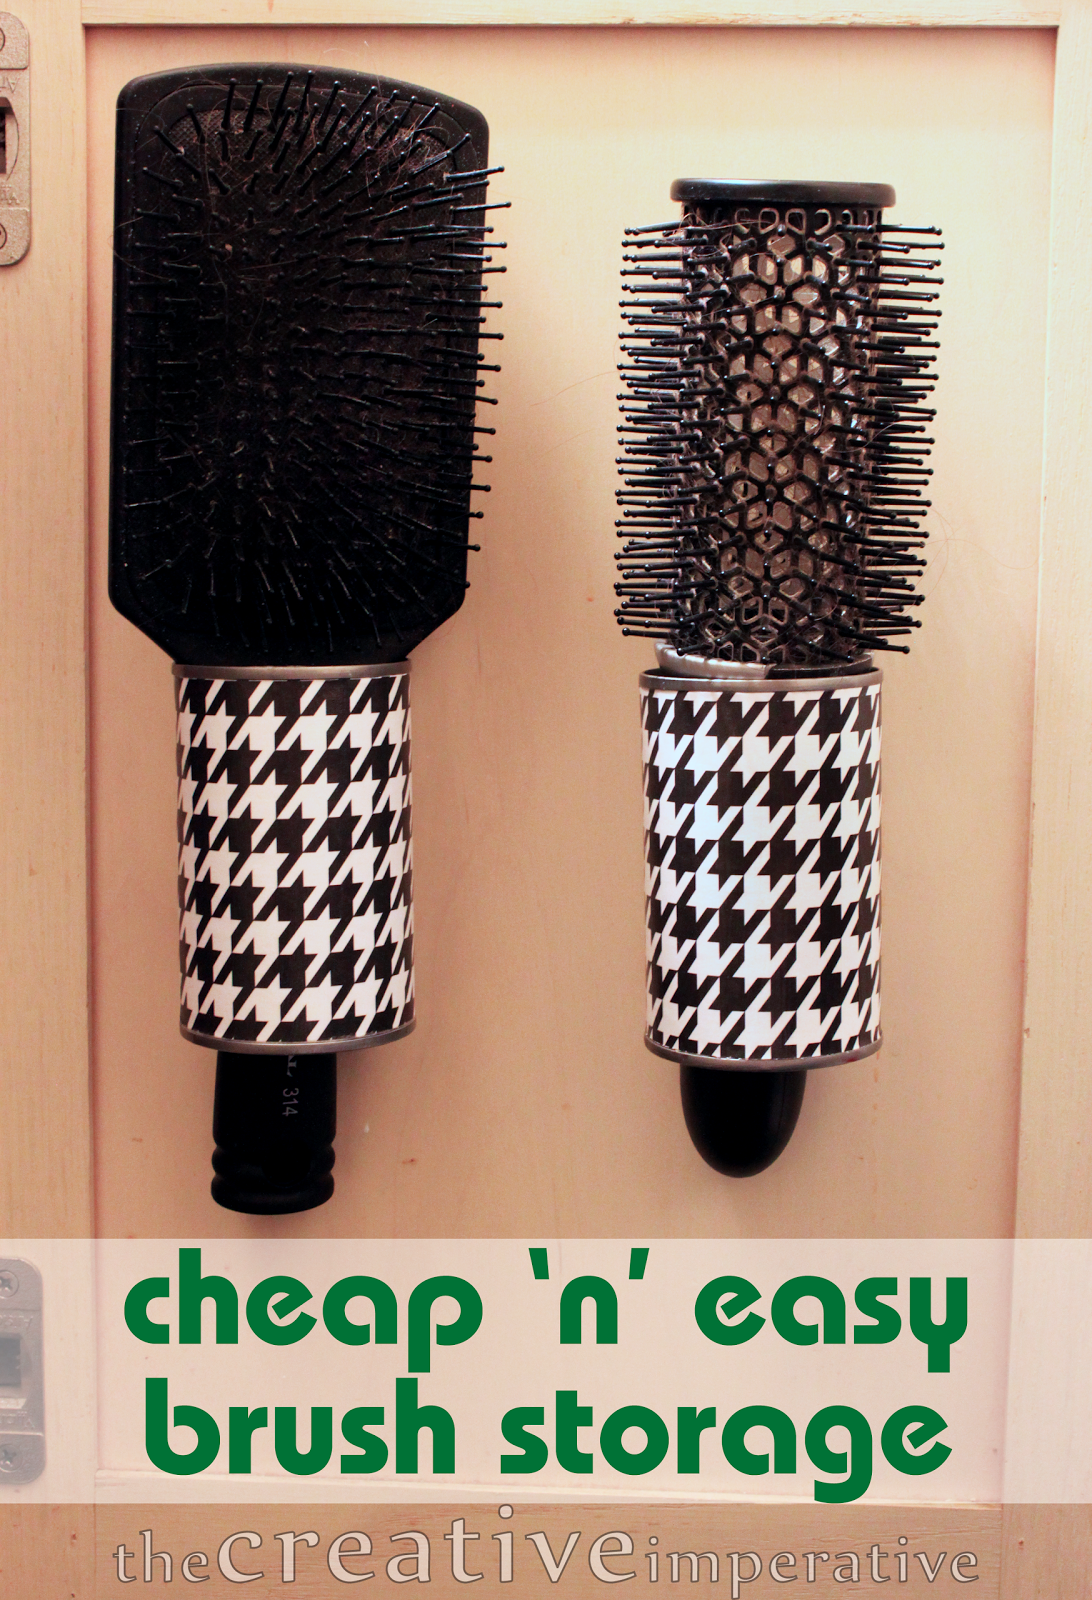 The Creative Imperative: Hanging Hairbrush Storage from Tin Cans